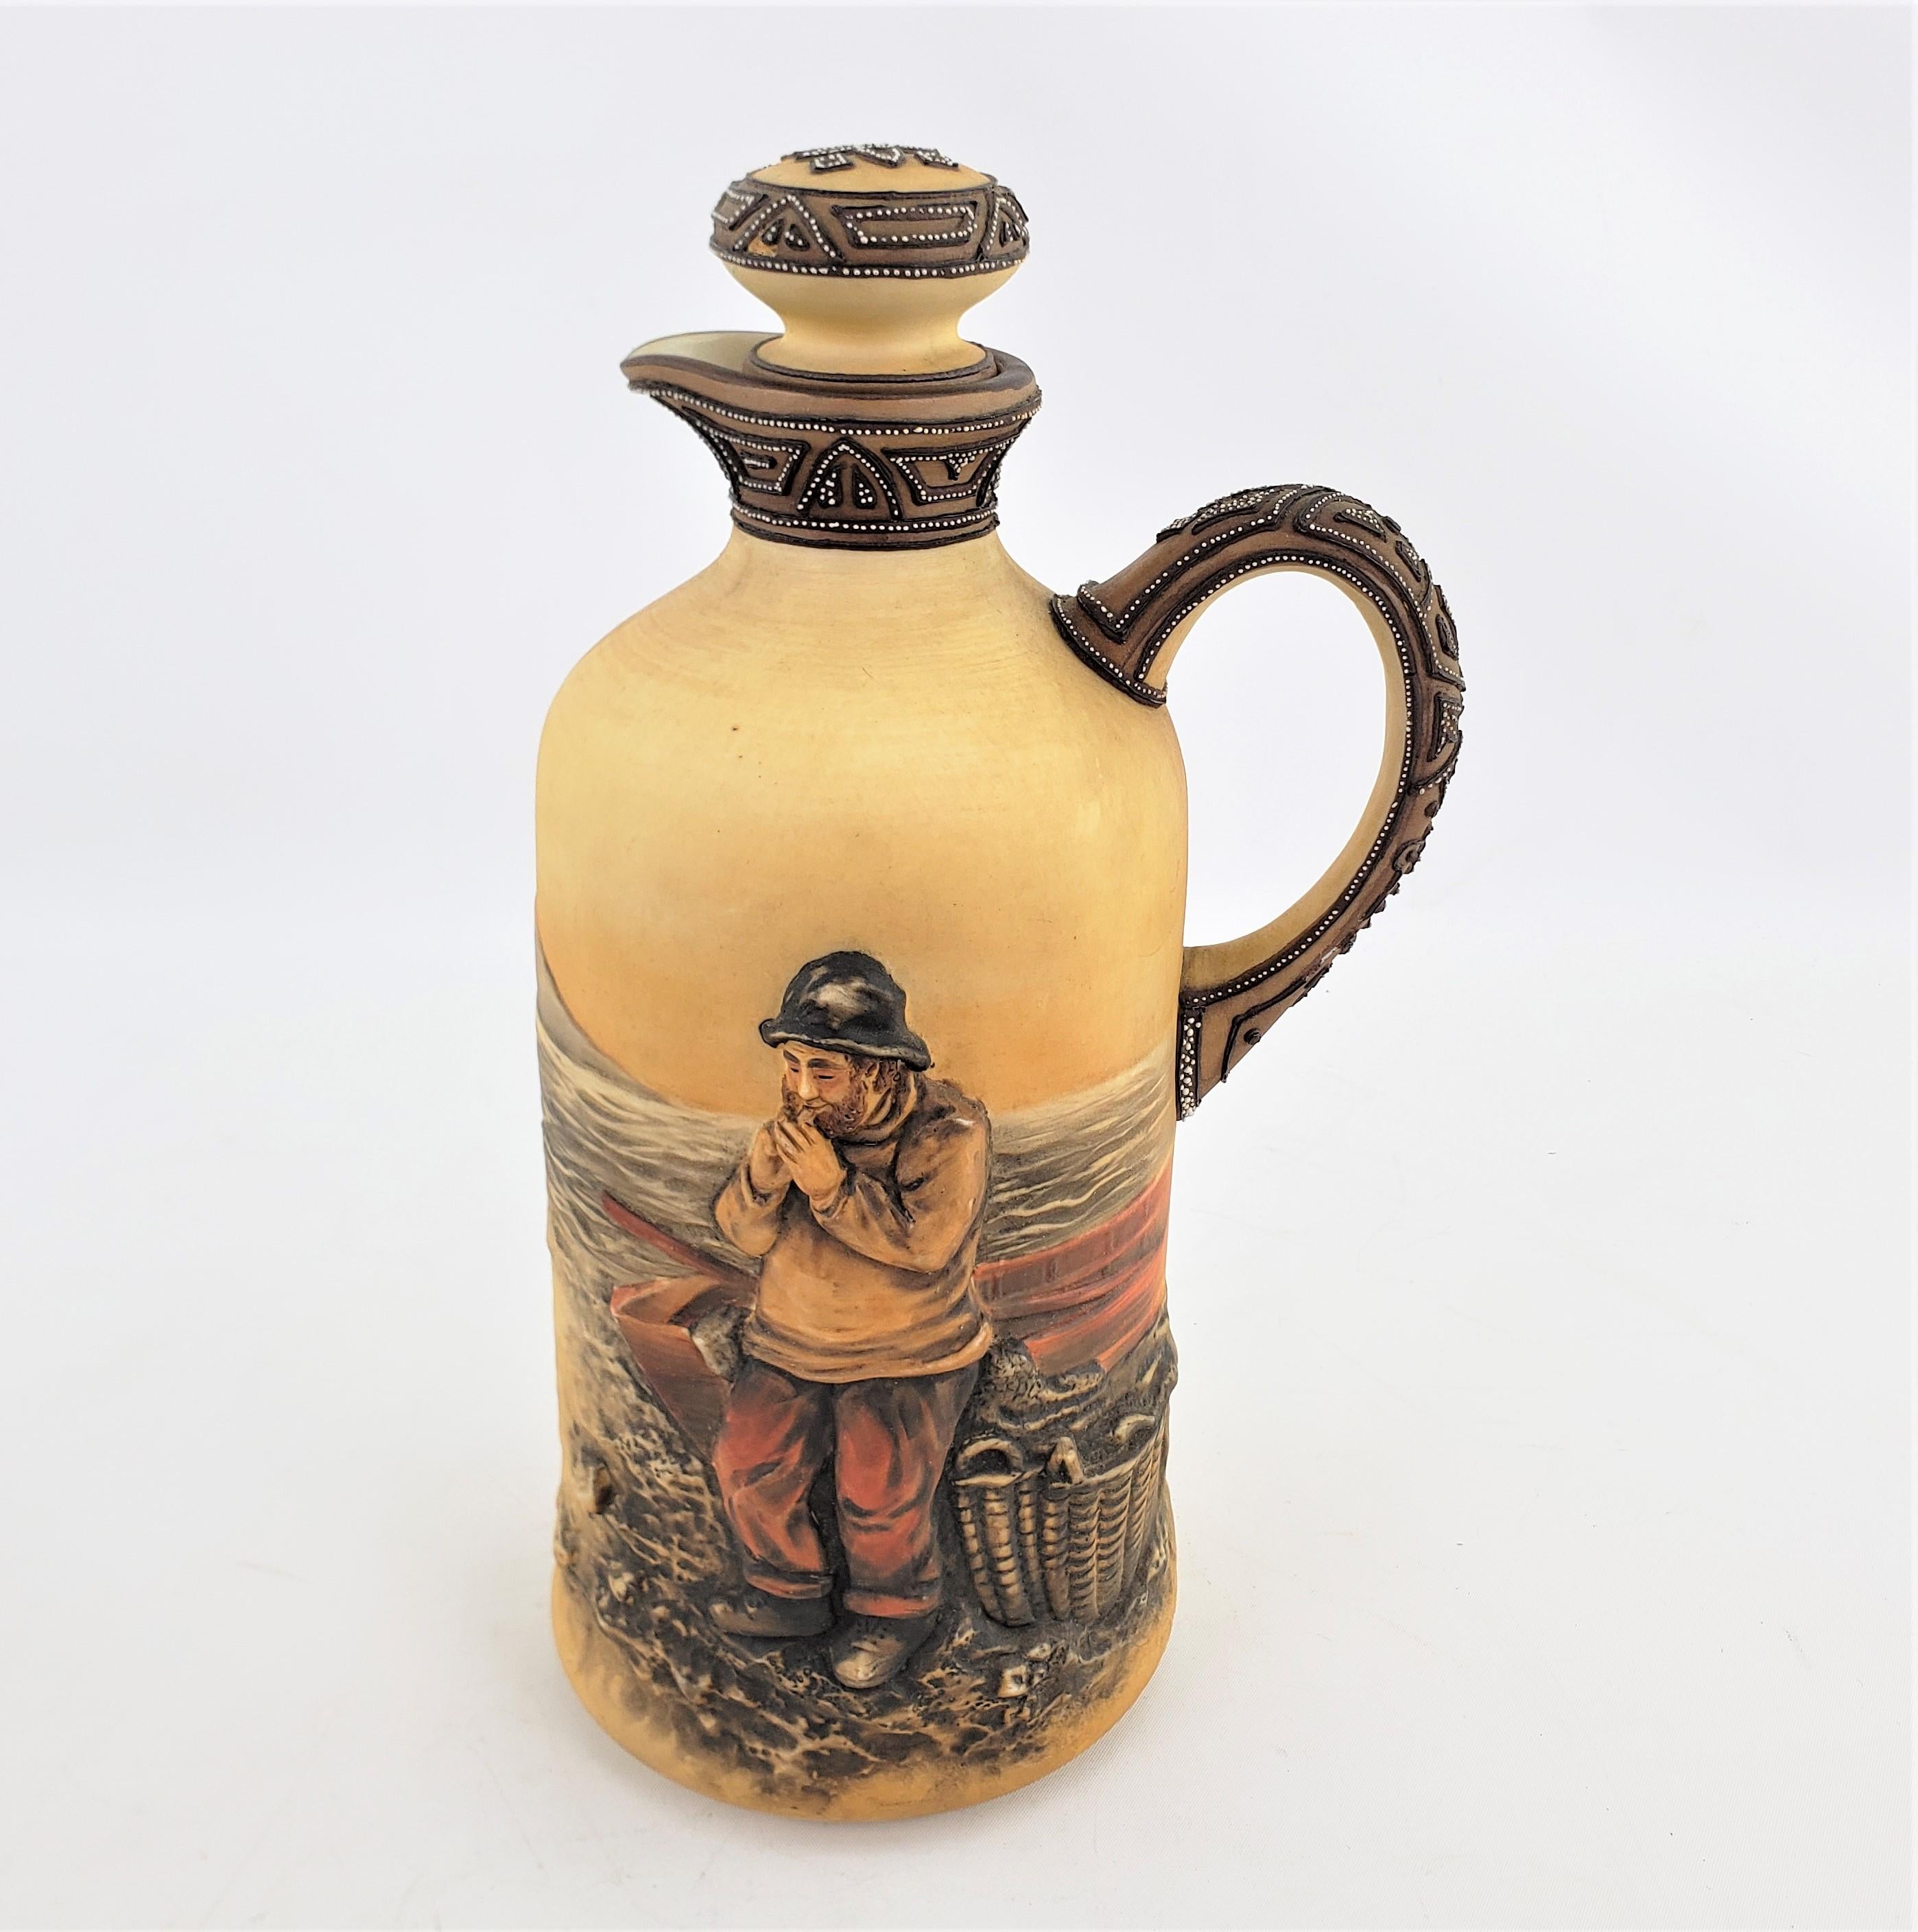 This antique porcelain decanter or jug was made by the renowned Nippon factory of Japan in approximately 1920 and done in the period Art Deco style. The decanter is done with a molded white porcelain which has been hand-painted. The entire decanter